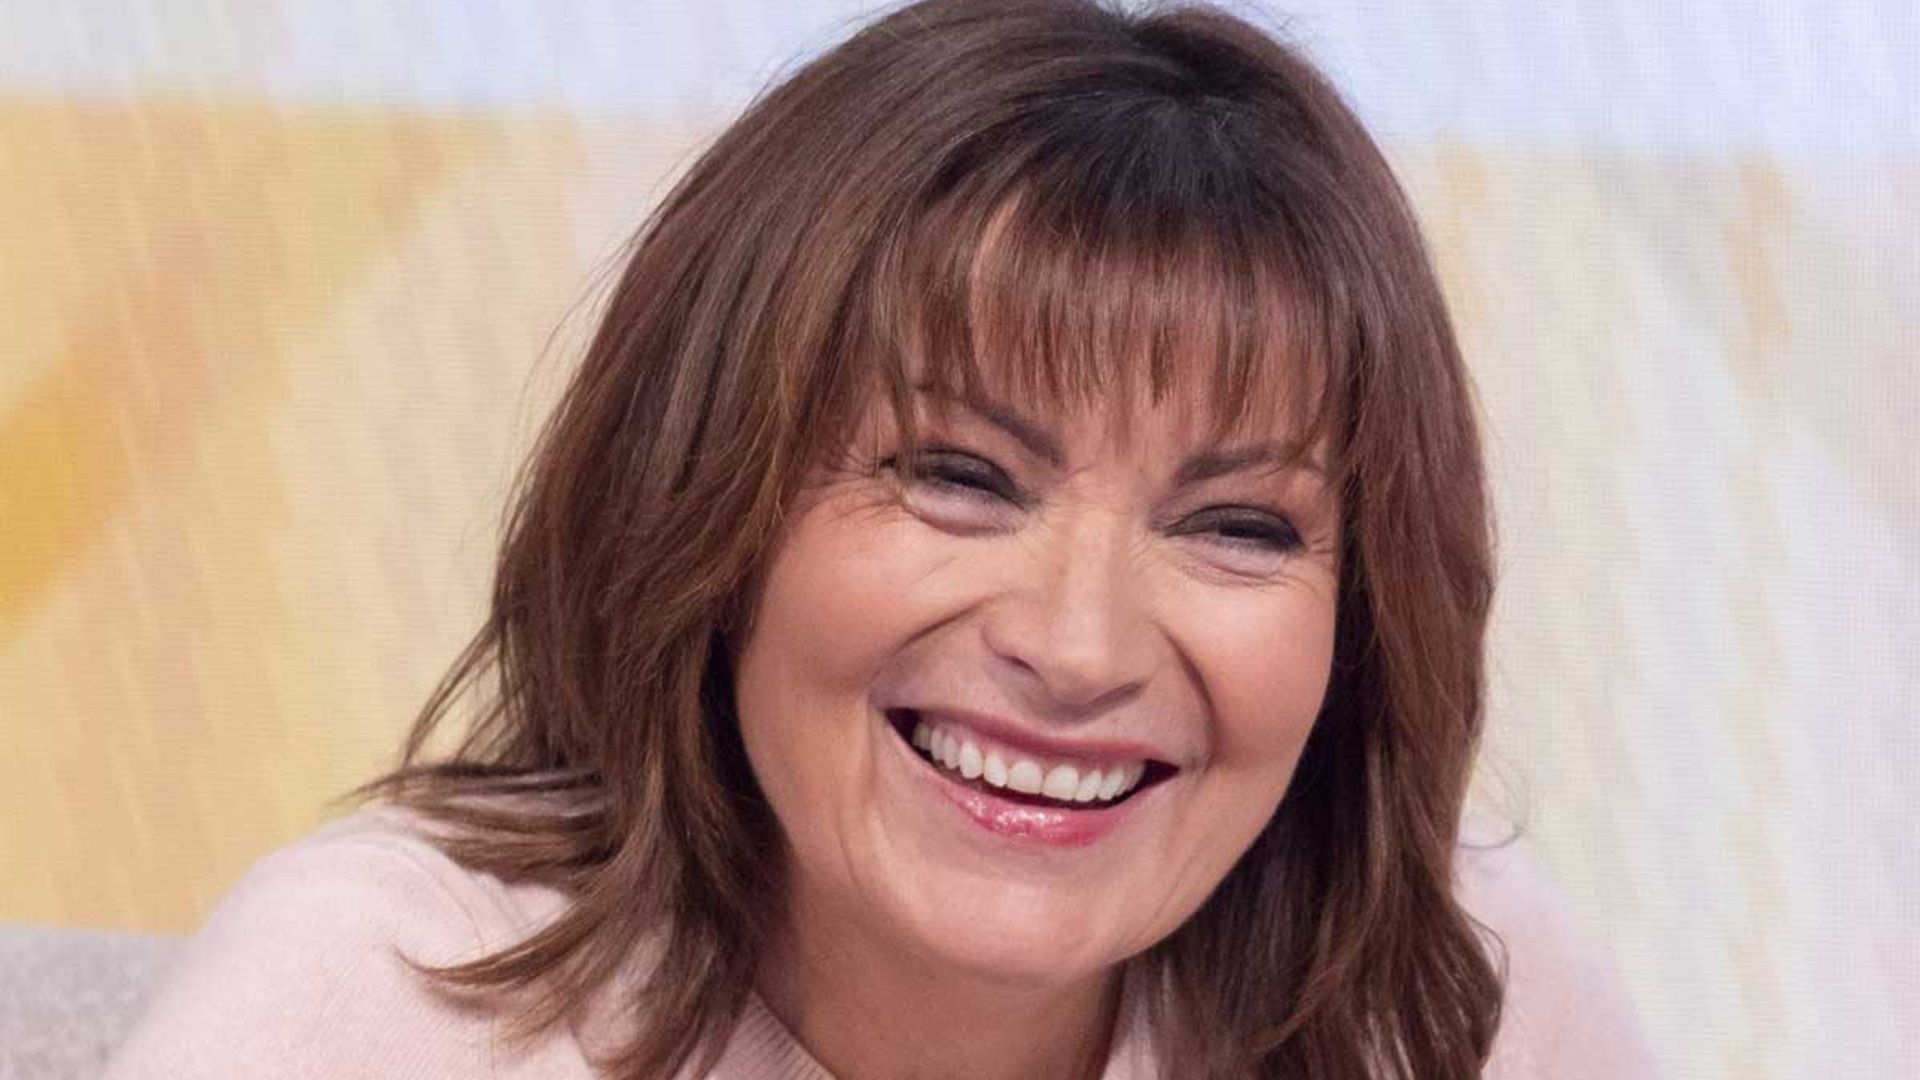 Lorraine Kelly’s heart-print dress is a Valentine’s Day must-have